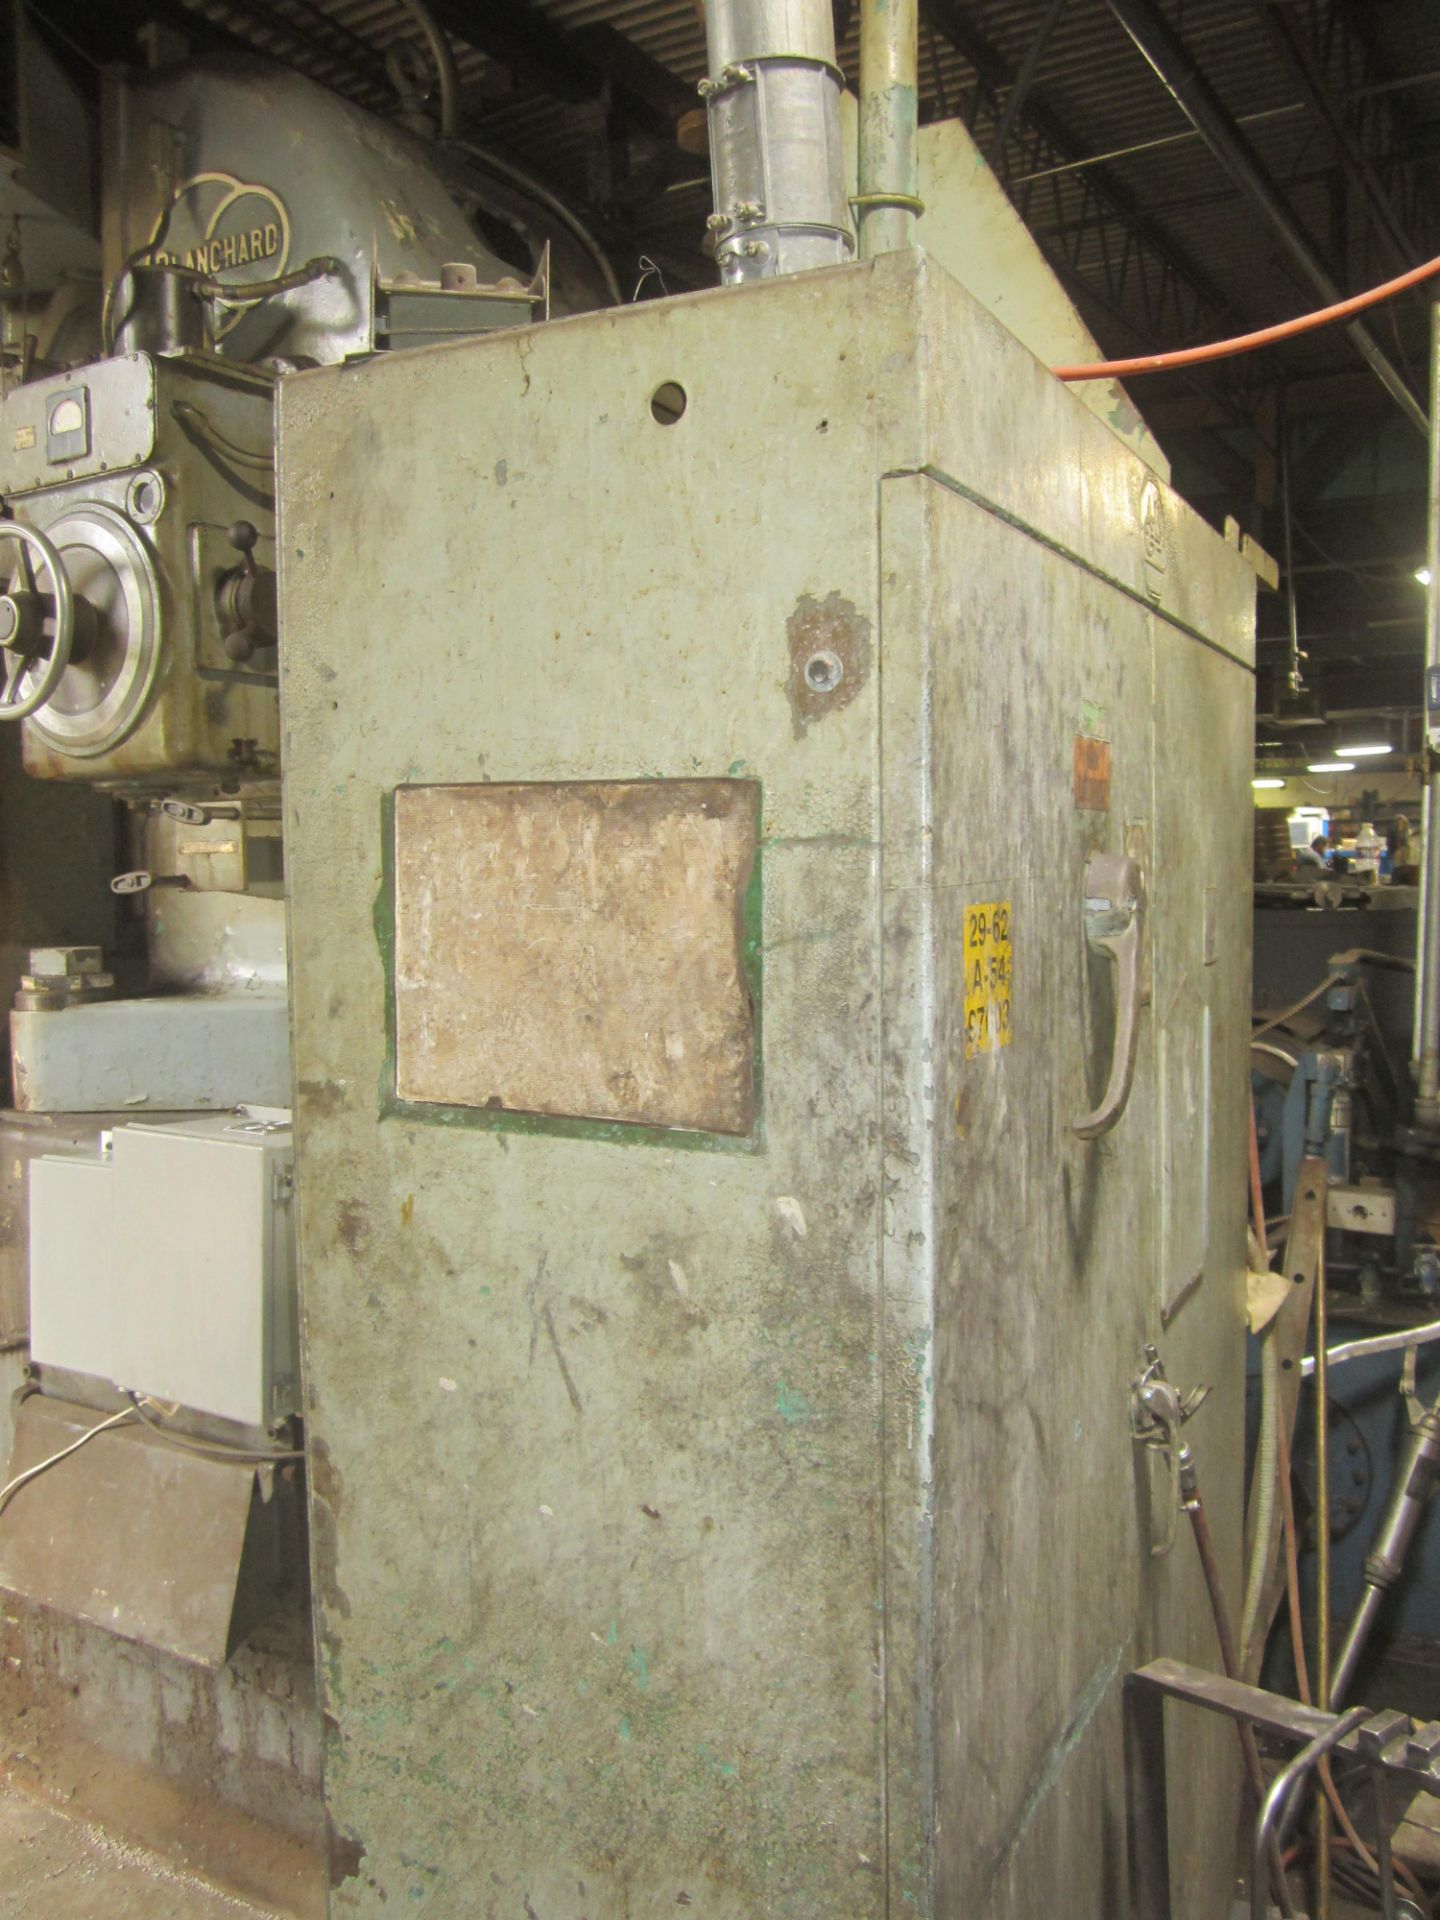 Blanchard 48" Rotary Surface Grinder, s/n 9802, 24" Segmented Wheel, Magnetic Chuck Recently Rebuilt - Image 13 of 15